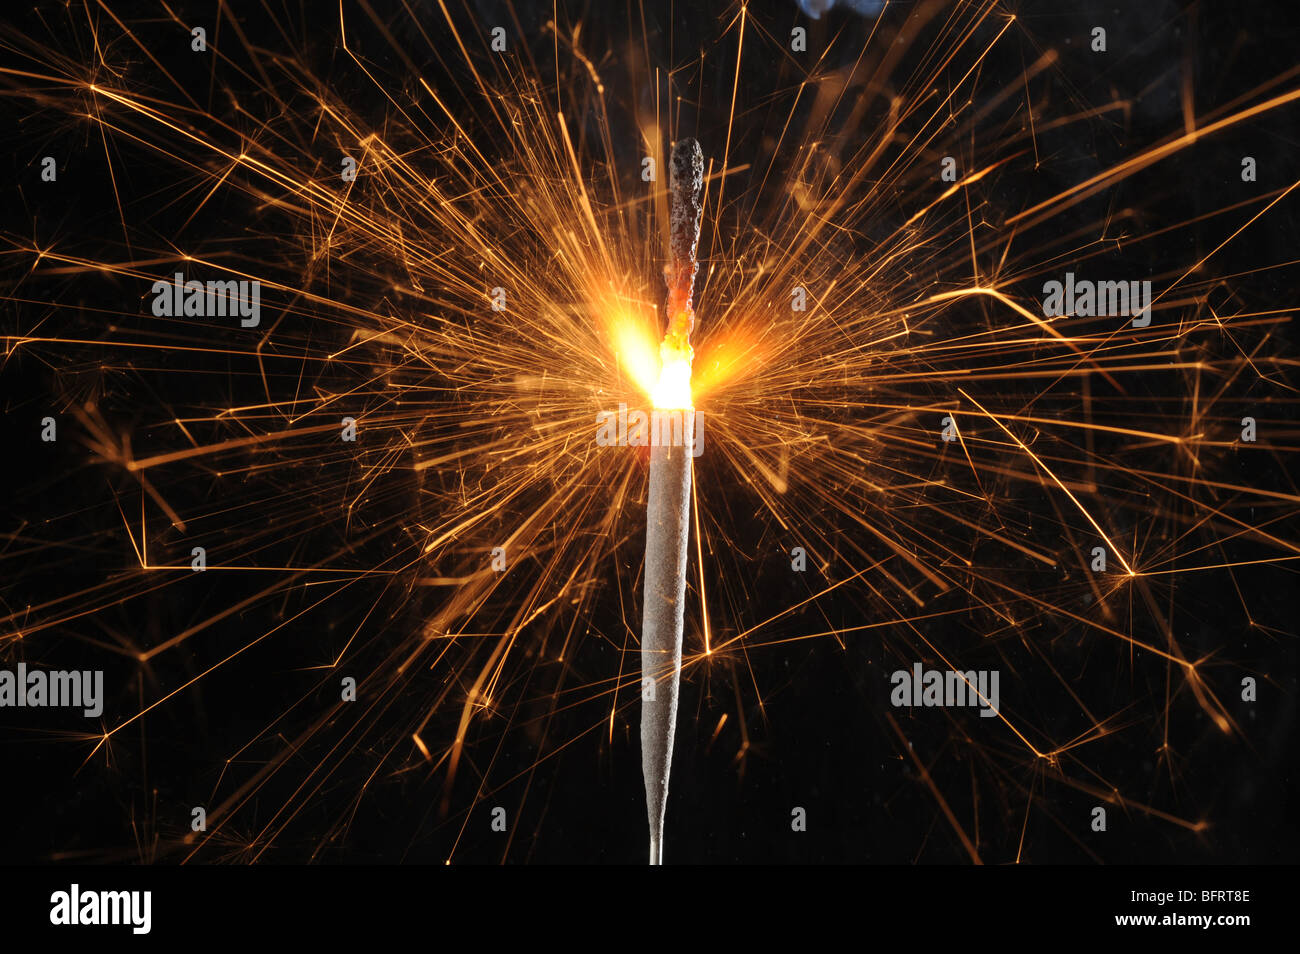 Abstract image of burning sparkler with dark background Stock Photo